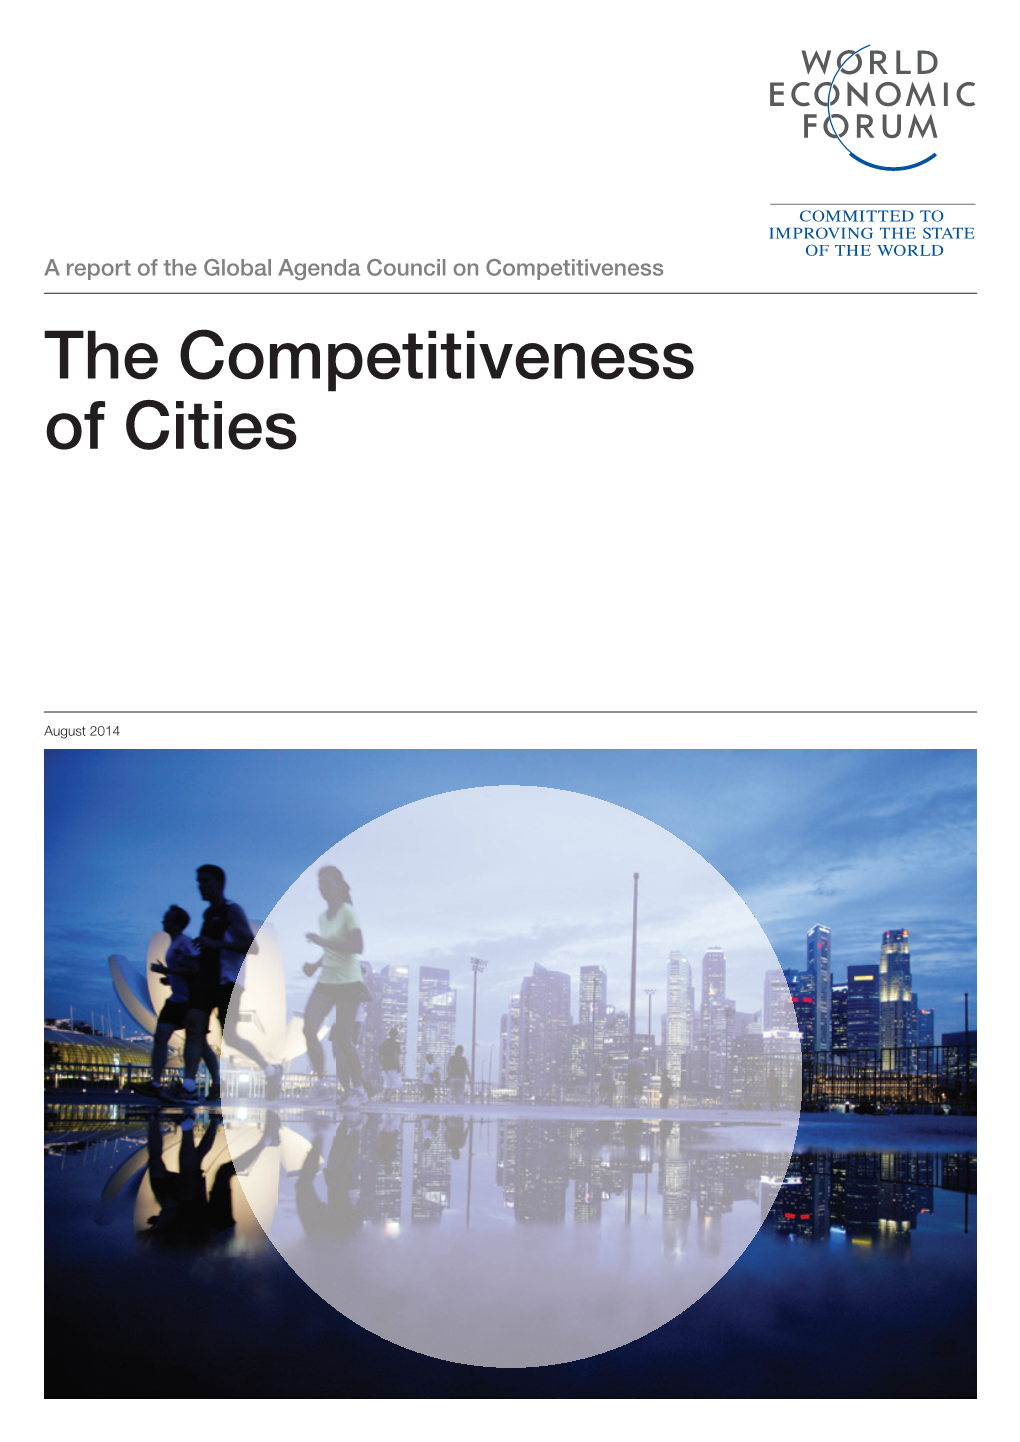 The Competitiveness of Cities